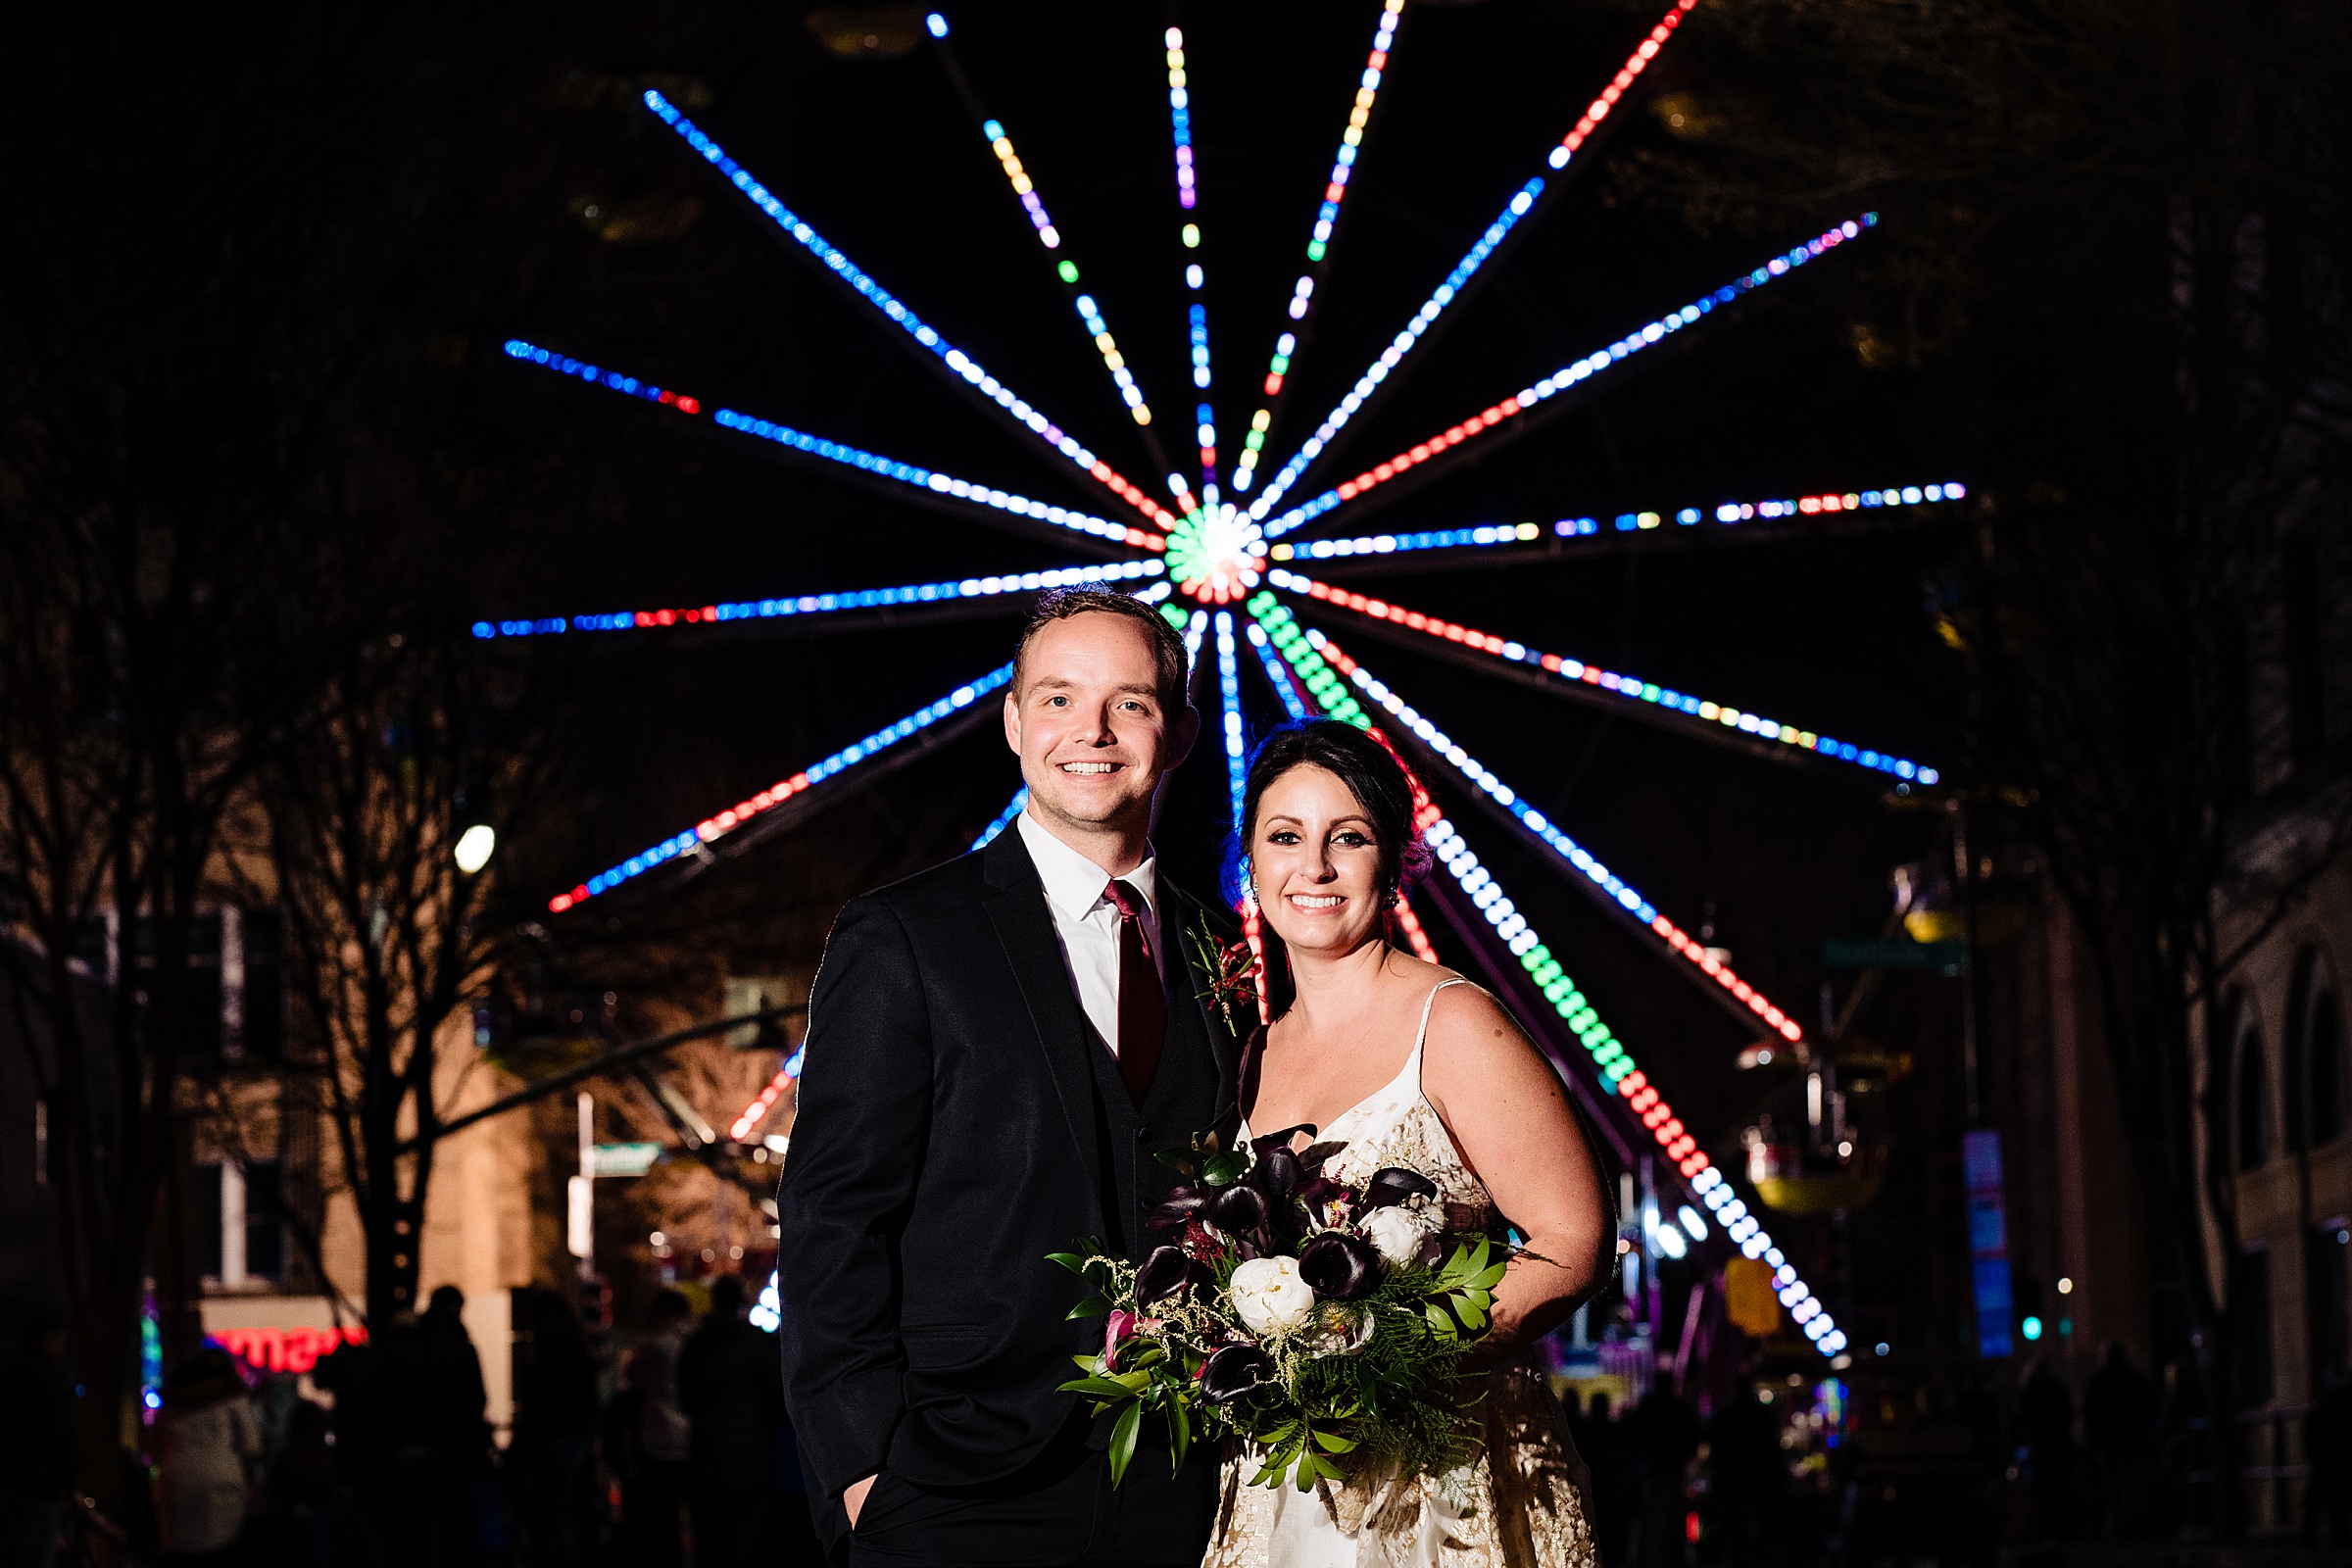 A bride and groom smile in front of a lit up ferris wheel in downtown Raleigh on New Year's Eve | kivusandcamera.com